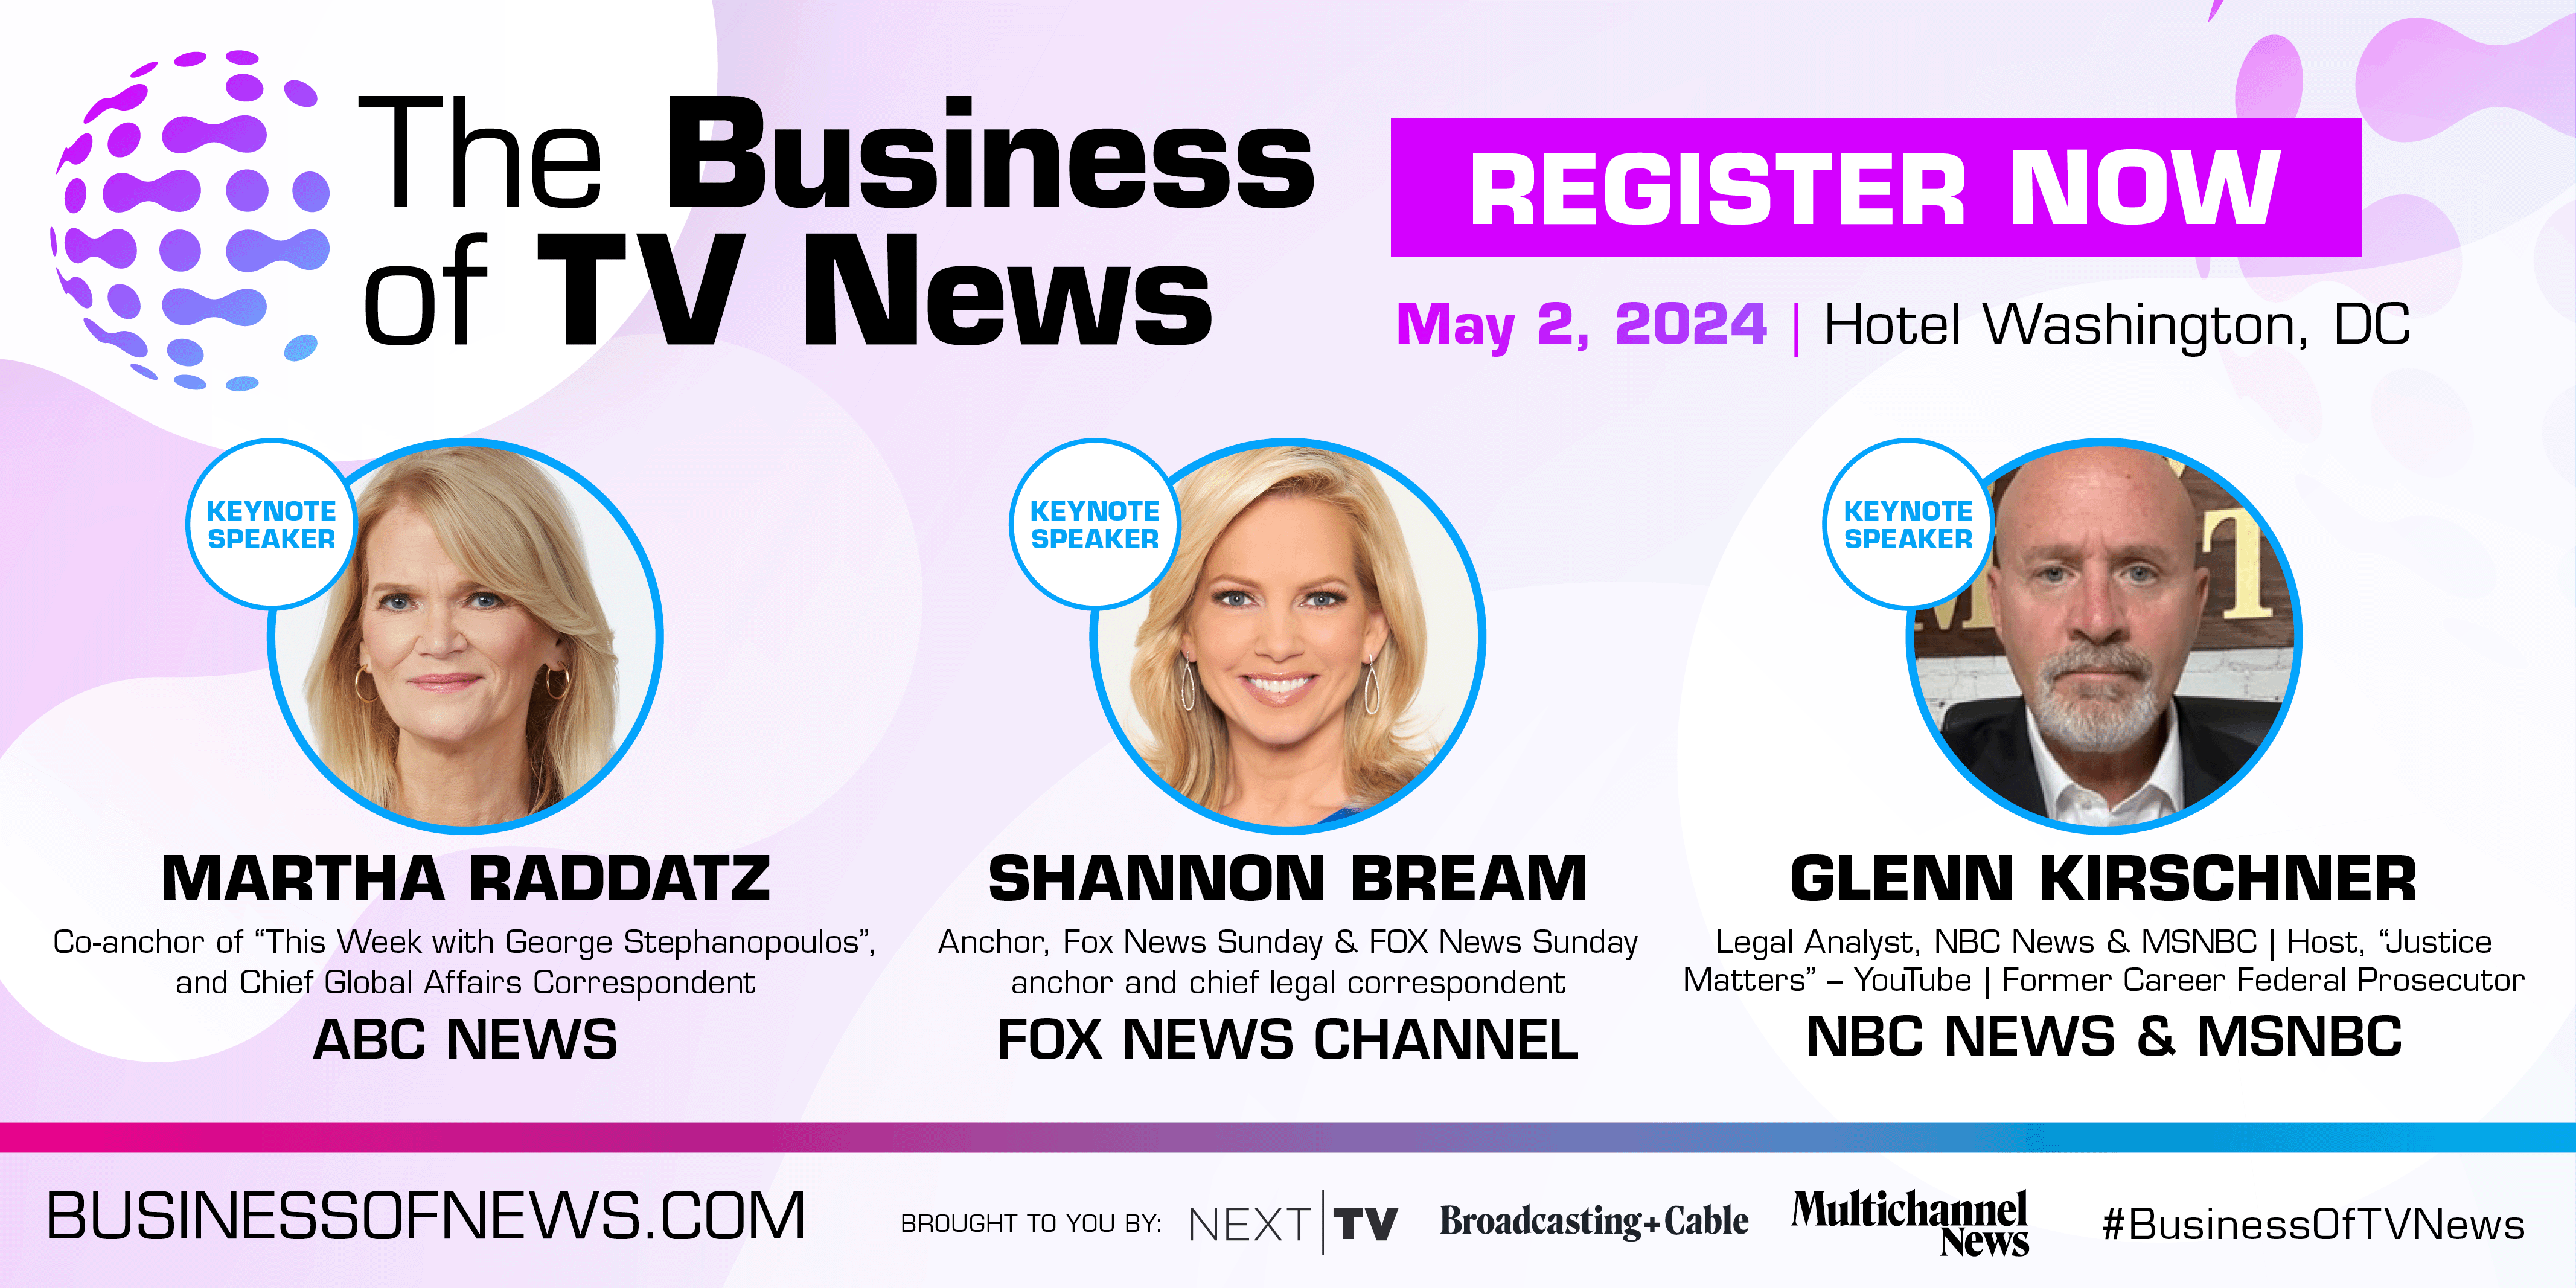 Attend 'The Business of TV News' Event in D.C. on May 2